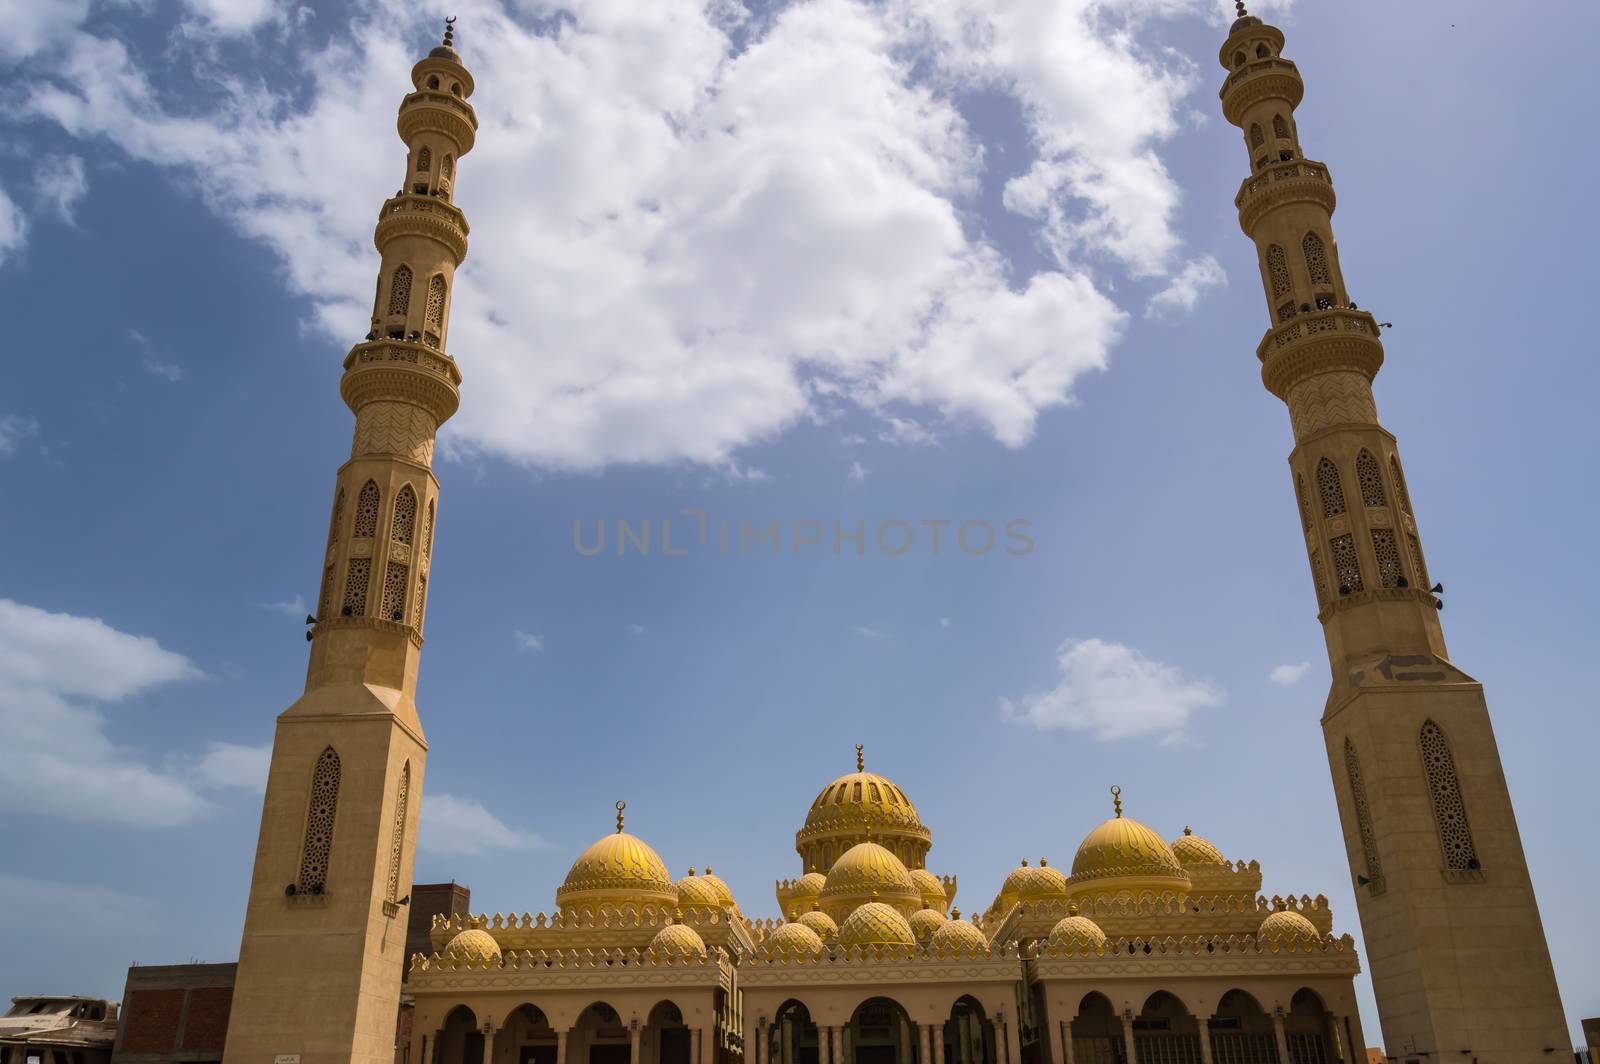 View of Al Mina Masjid Mosque in the port city of Hurghada in Egypt